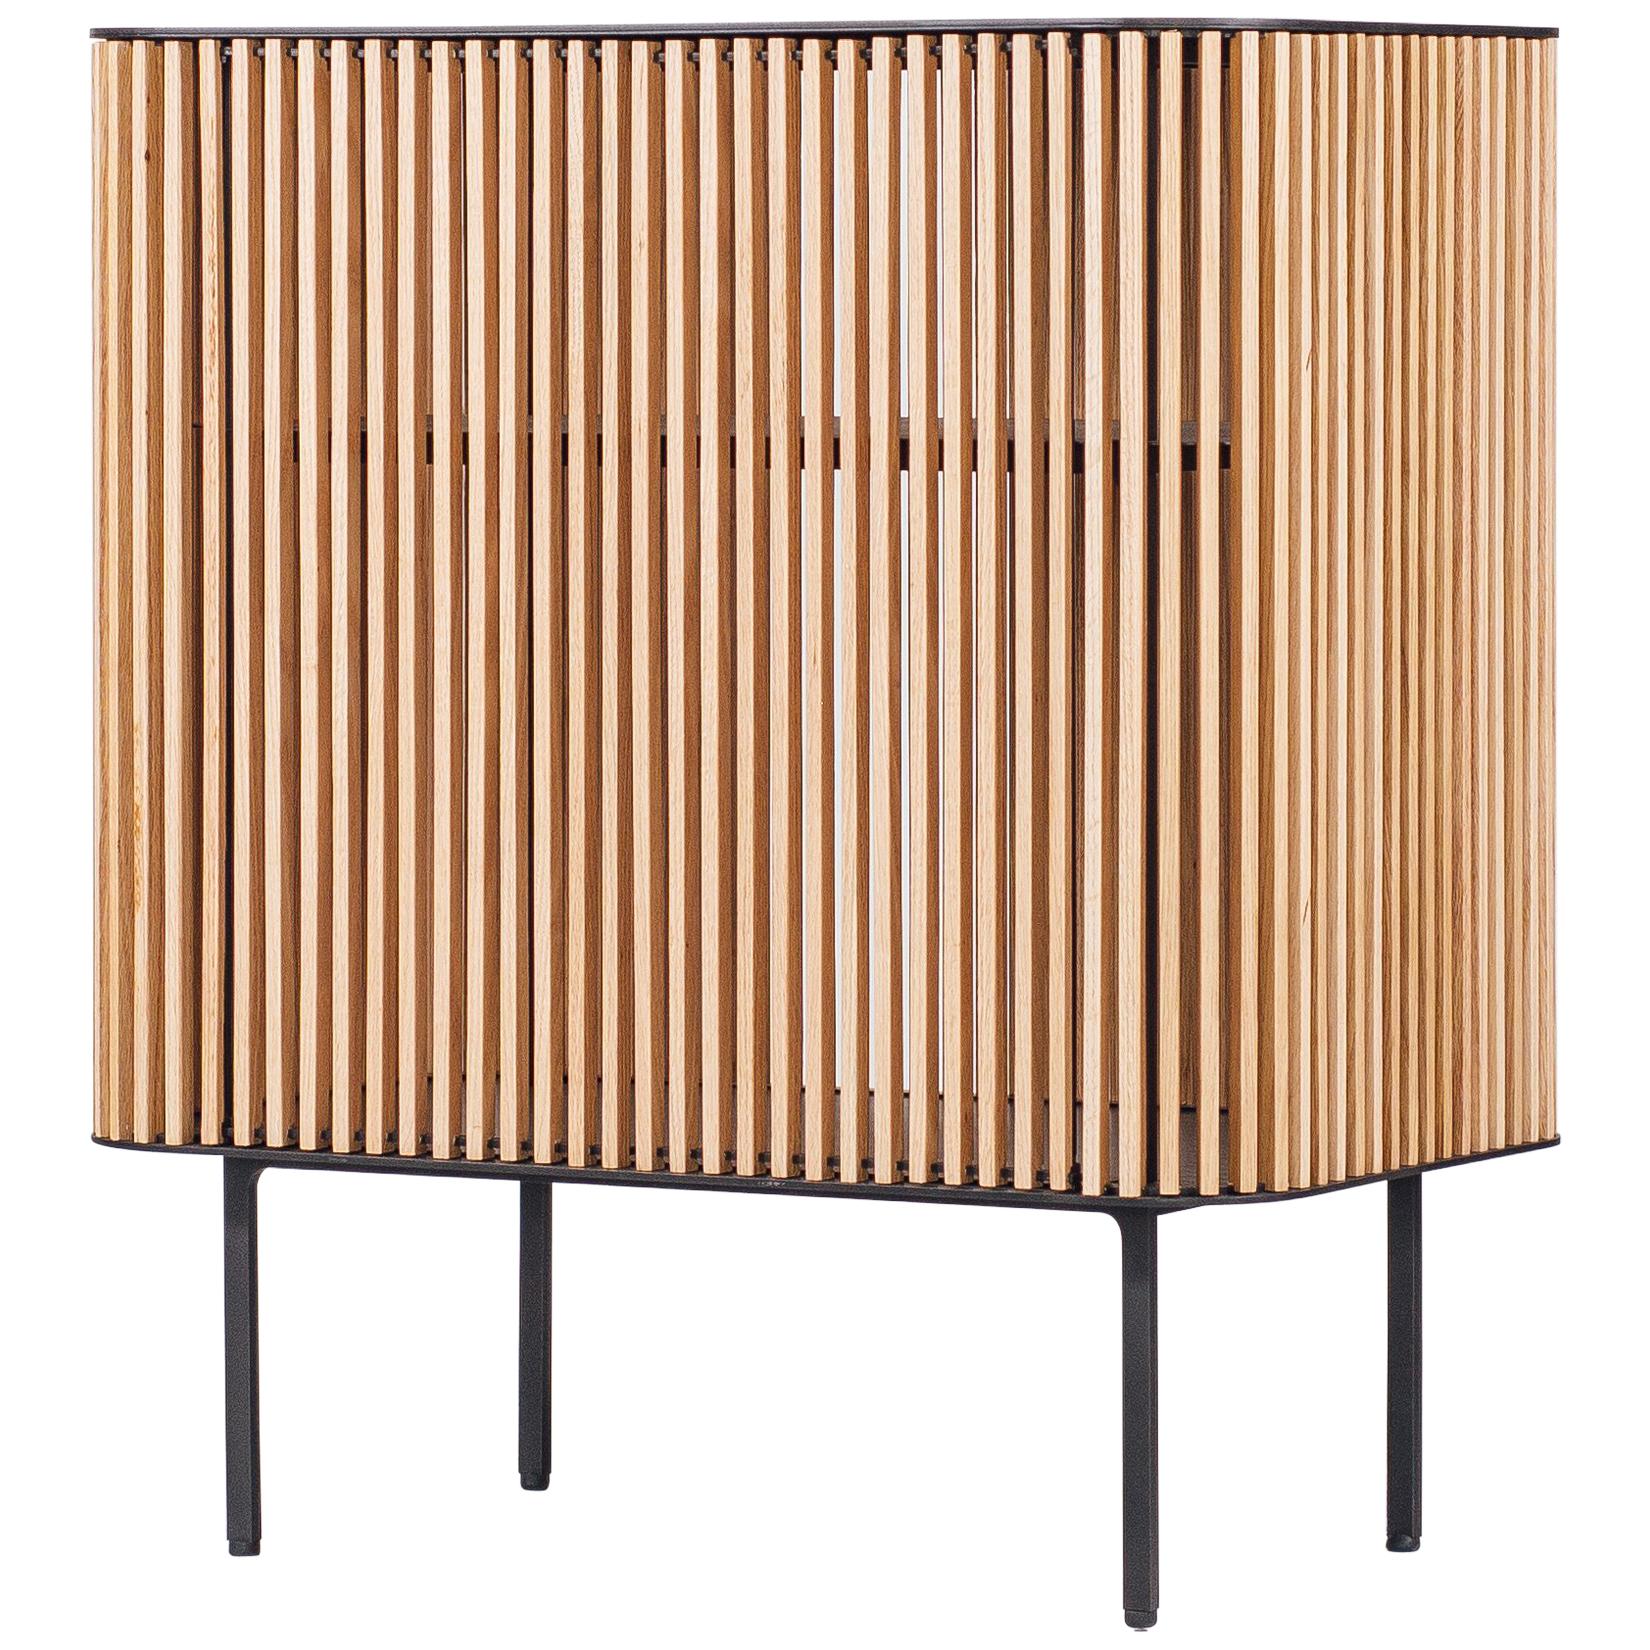 Dry Bar in Blackened Laser-Cut Steel Frame with Oak Slats and Leather Top For Sale